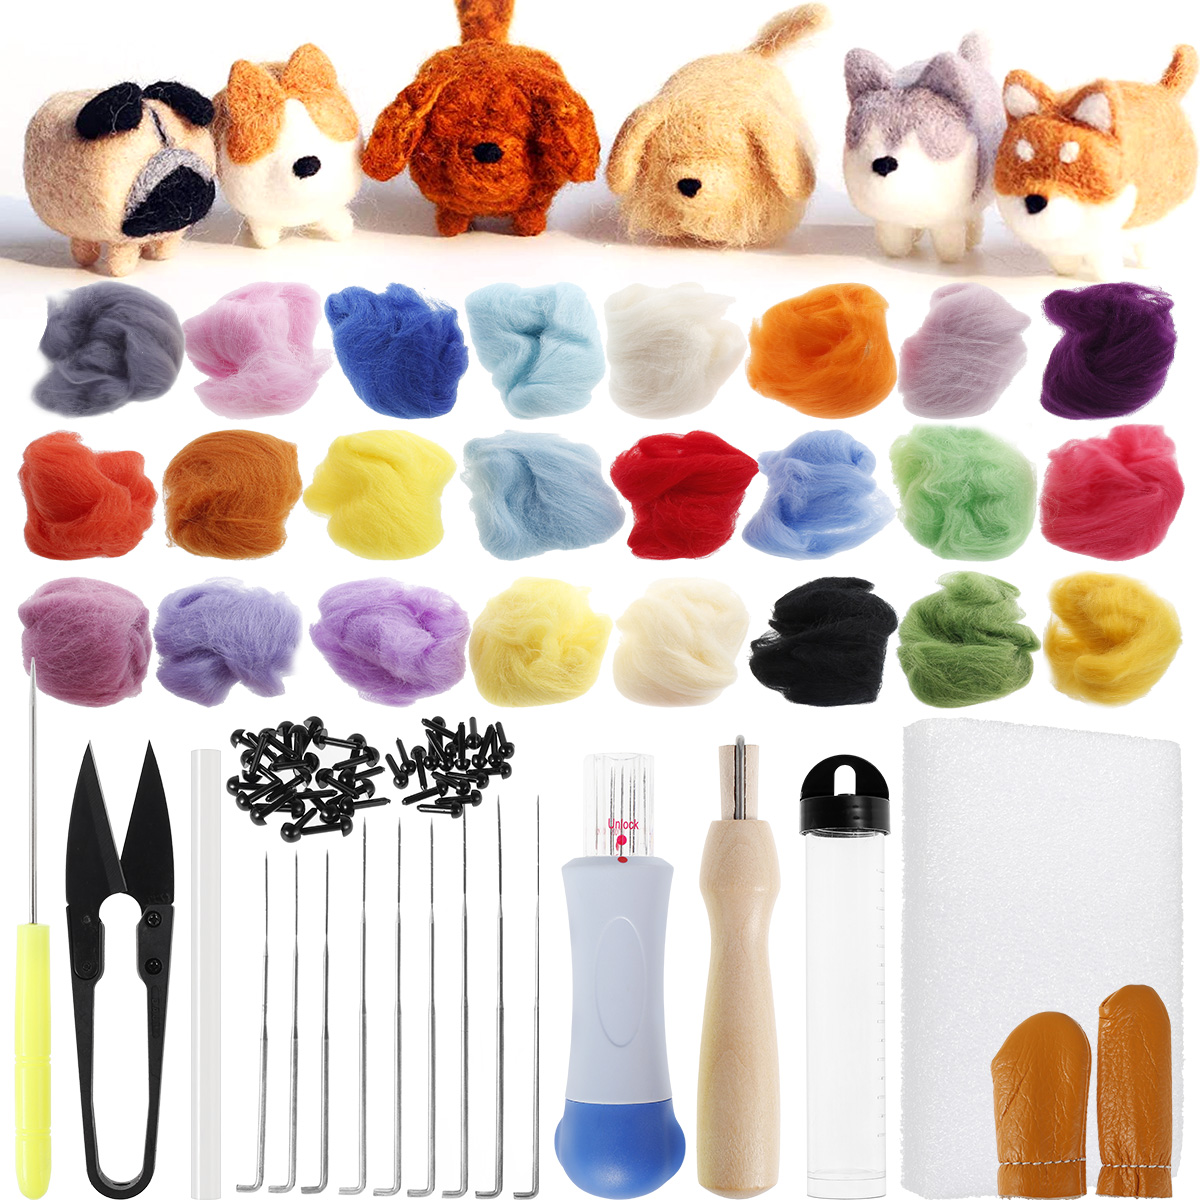 Austok Needle Felting Kit, 24 Colors Wool Roving, Needle Felting Starter Kit,Wool Felt Tools with Felting Tool Instruction Included for Felted Animal